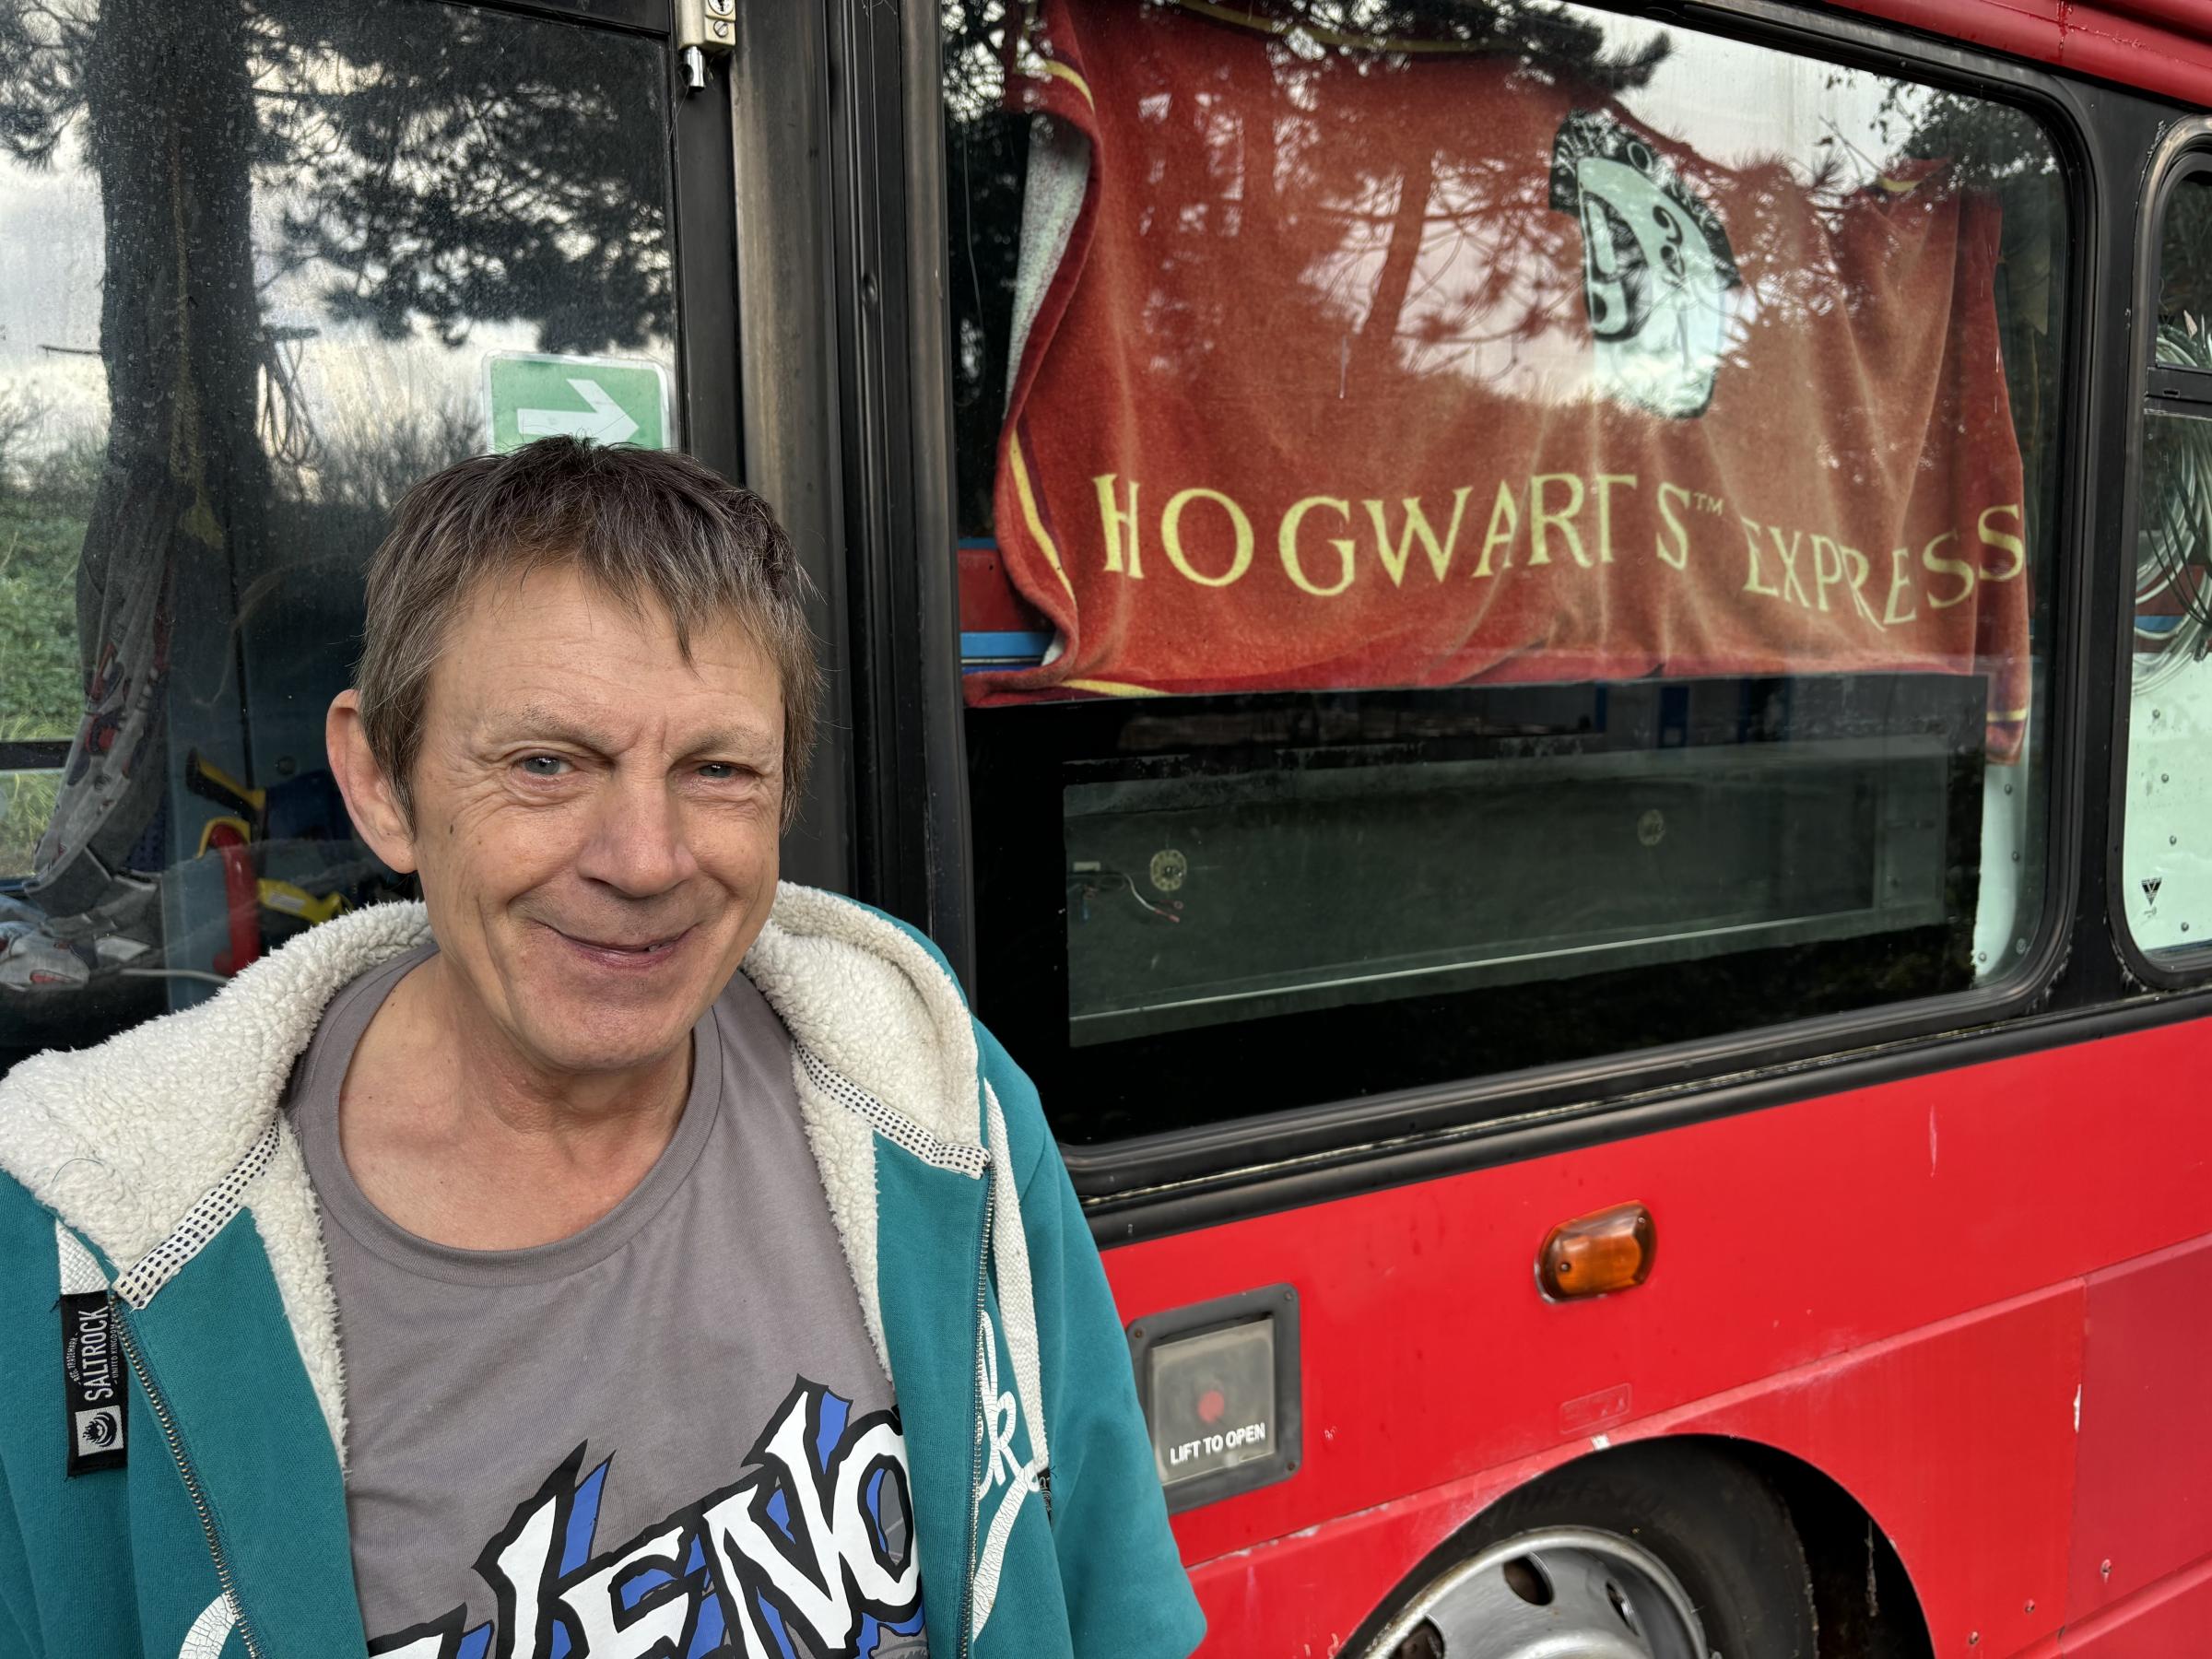 Neil Wainwright\s bus is adorned with a Hogwarts Express banner (Pic: Lee Trewhela / LDRS)